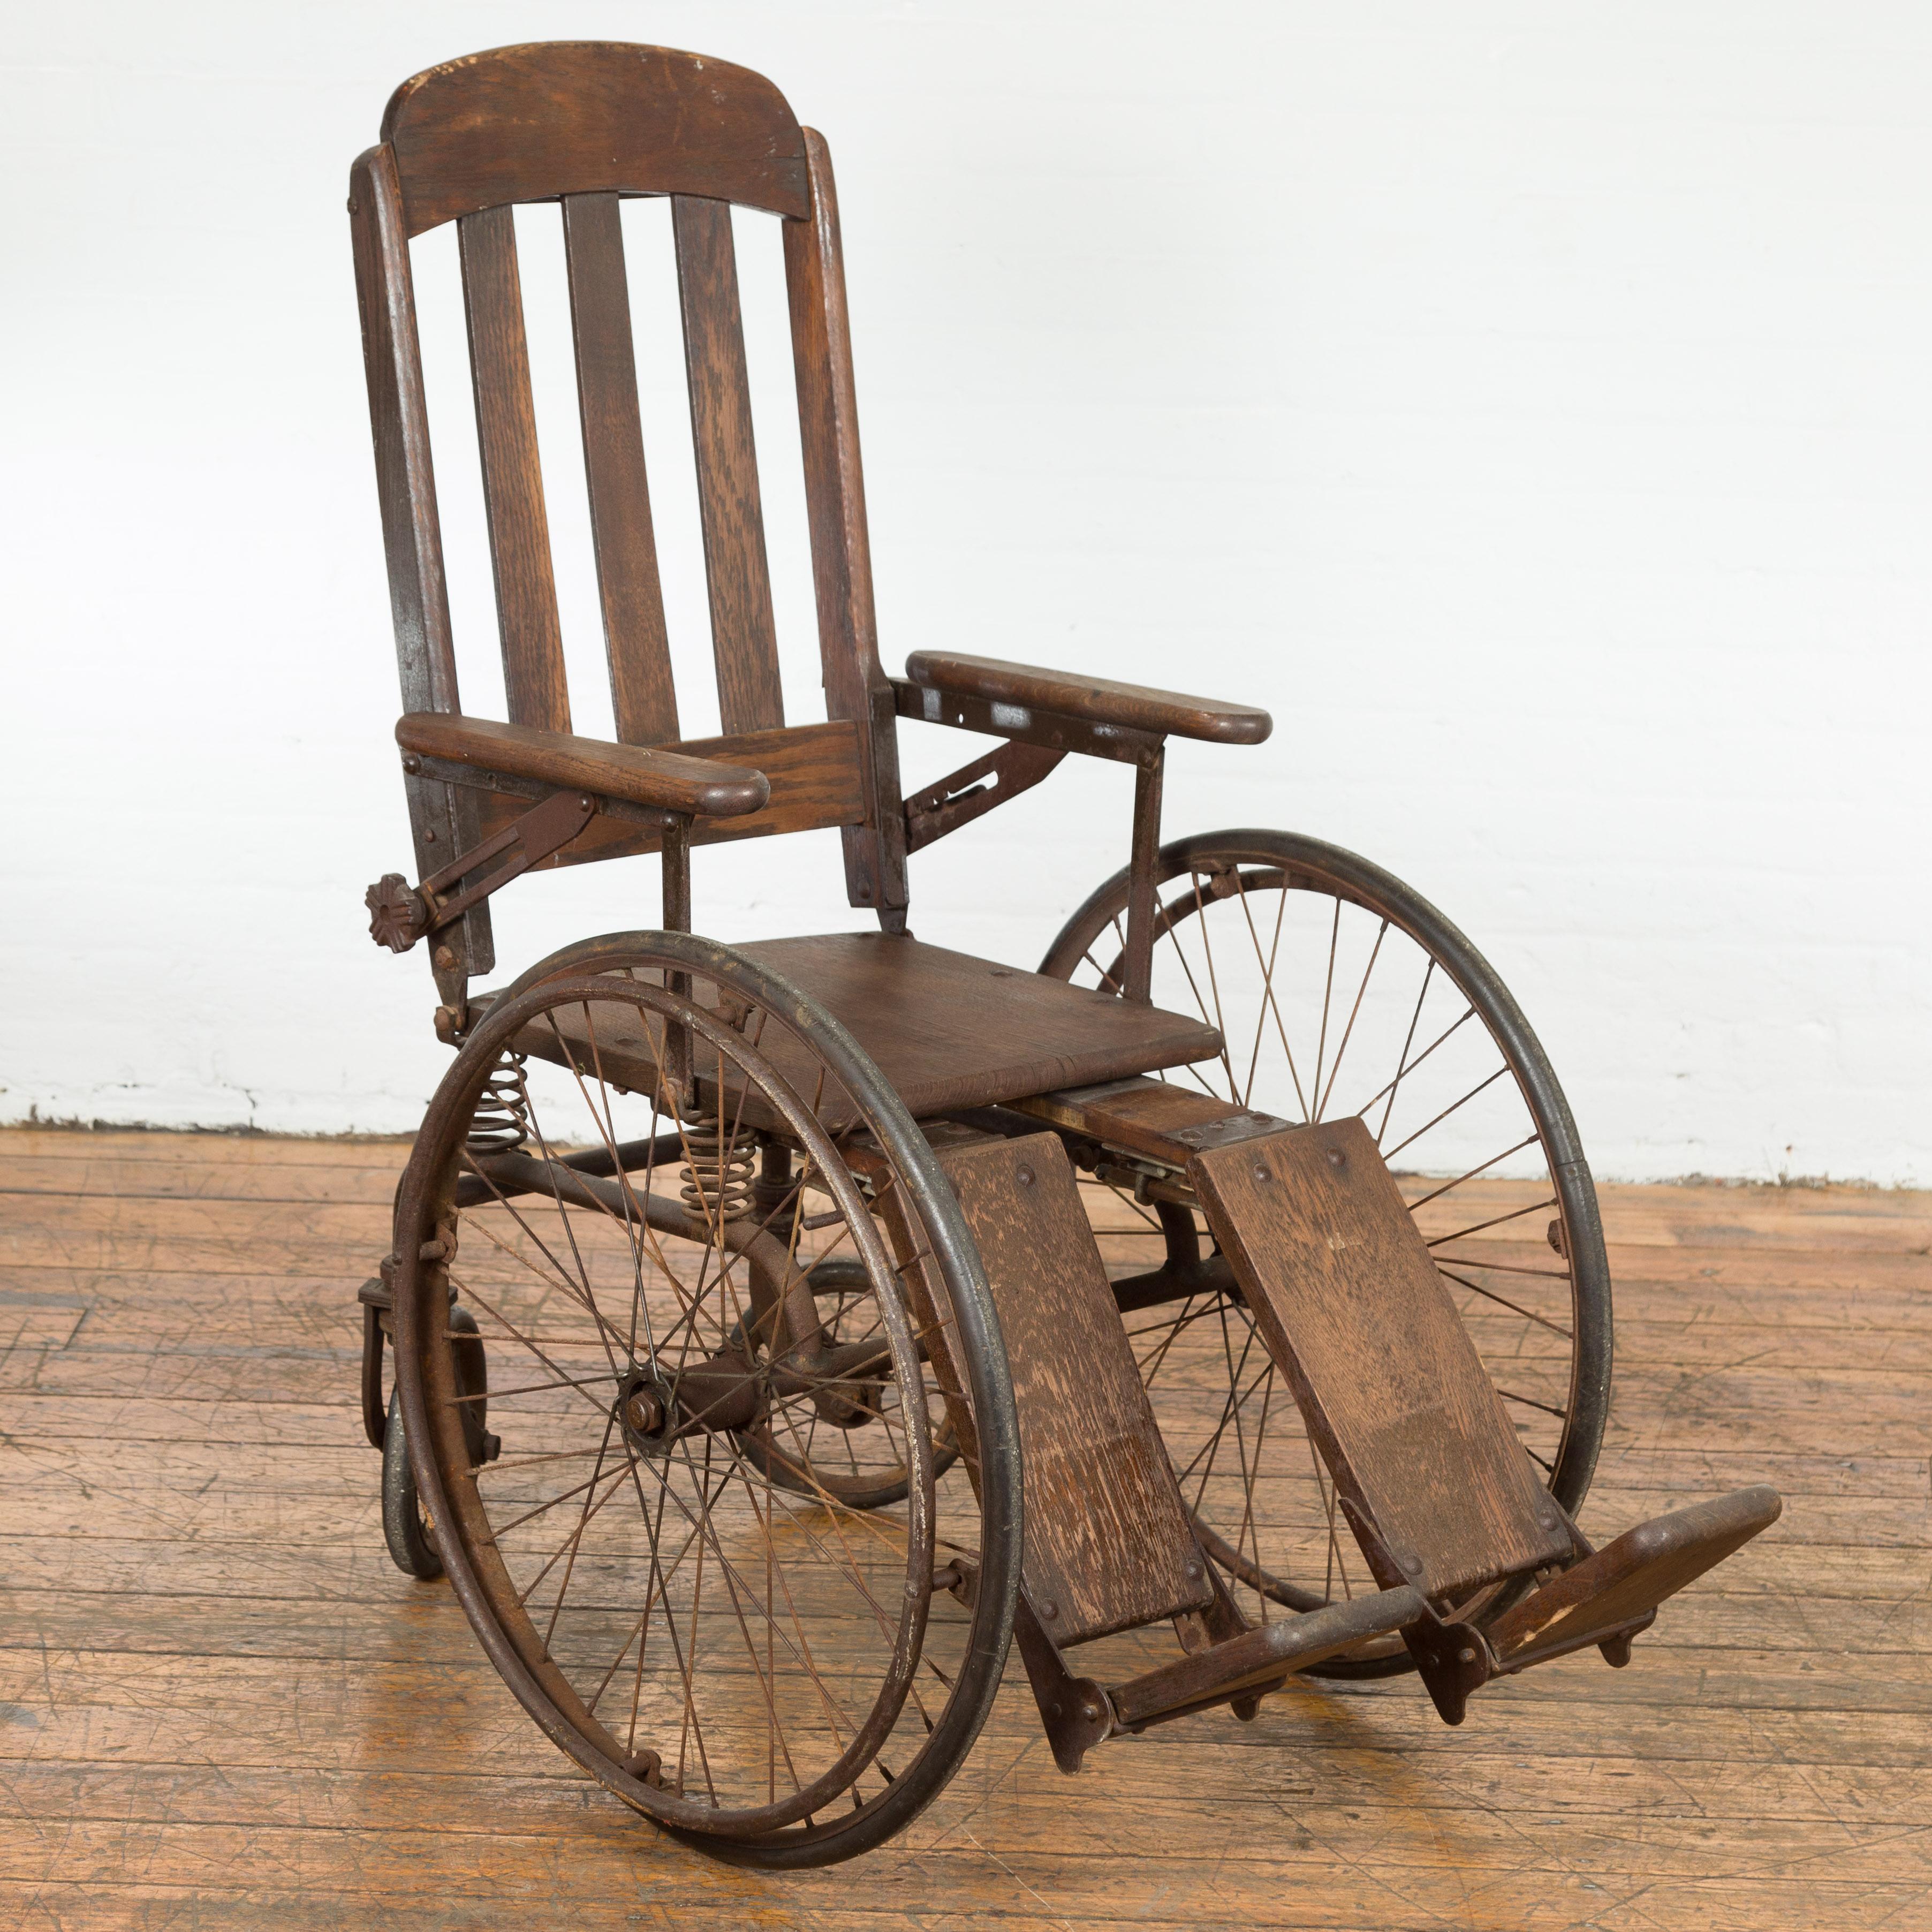 A vintage wooden wheelchair from Montgomery Wards in Grand Rapids, Michigan. Imbued with the spirit of an era bygone, this vintage wooden wheelchair from Montgomery Wards in Grand Rapids, Michigan, is a remarkable vestige of medical history and a